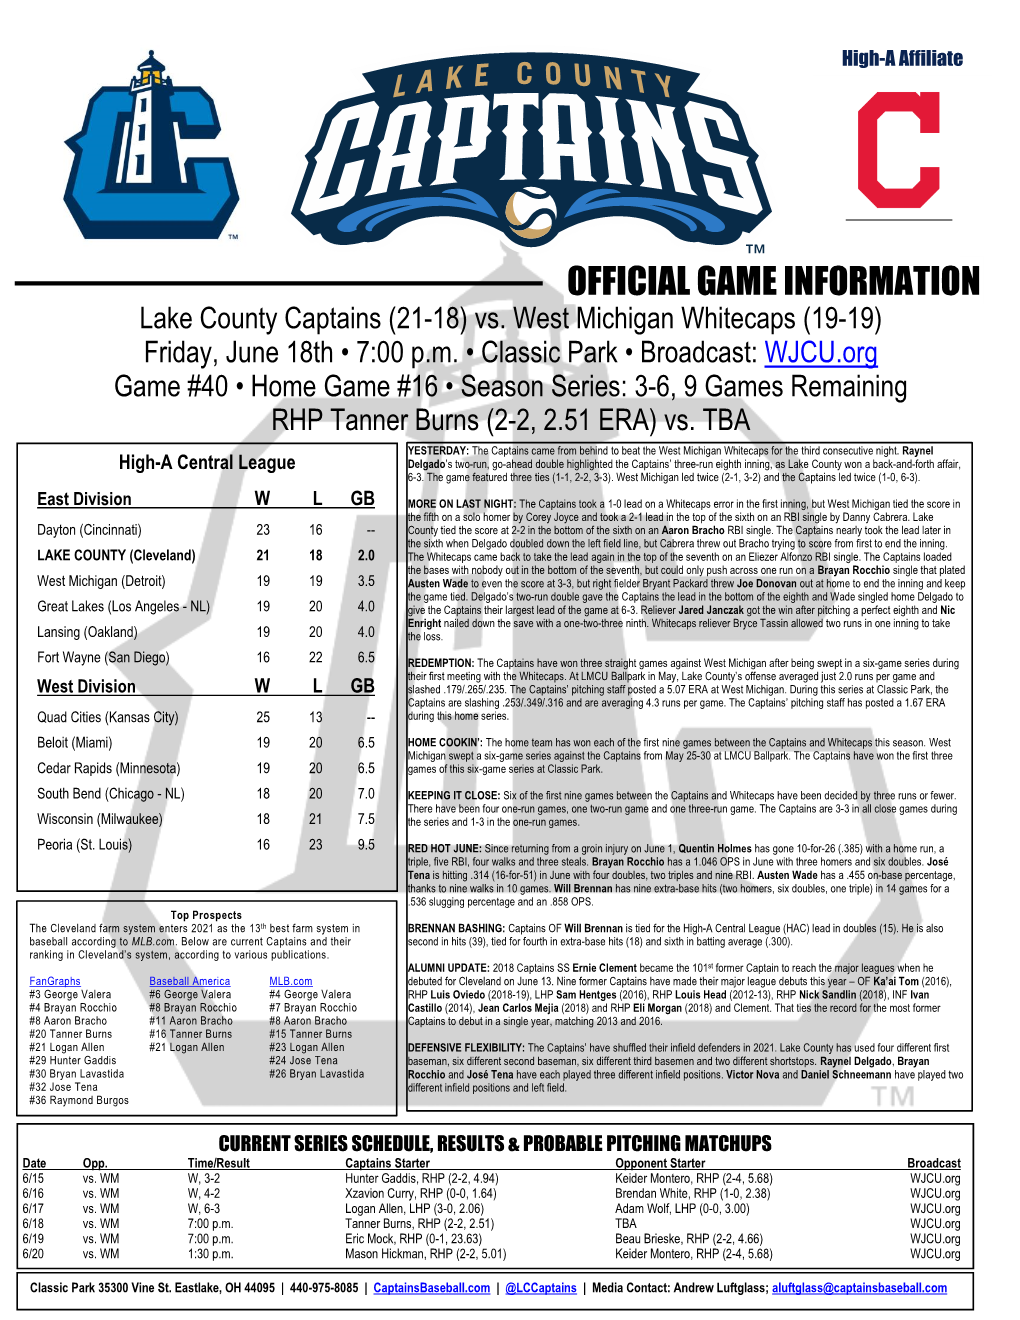 OFFICIAL GAME INFORMATION Lake County Captains (21-18) Vs